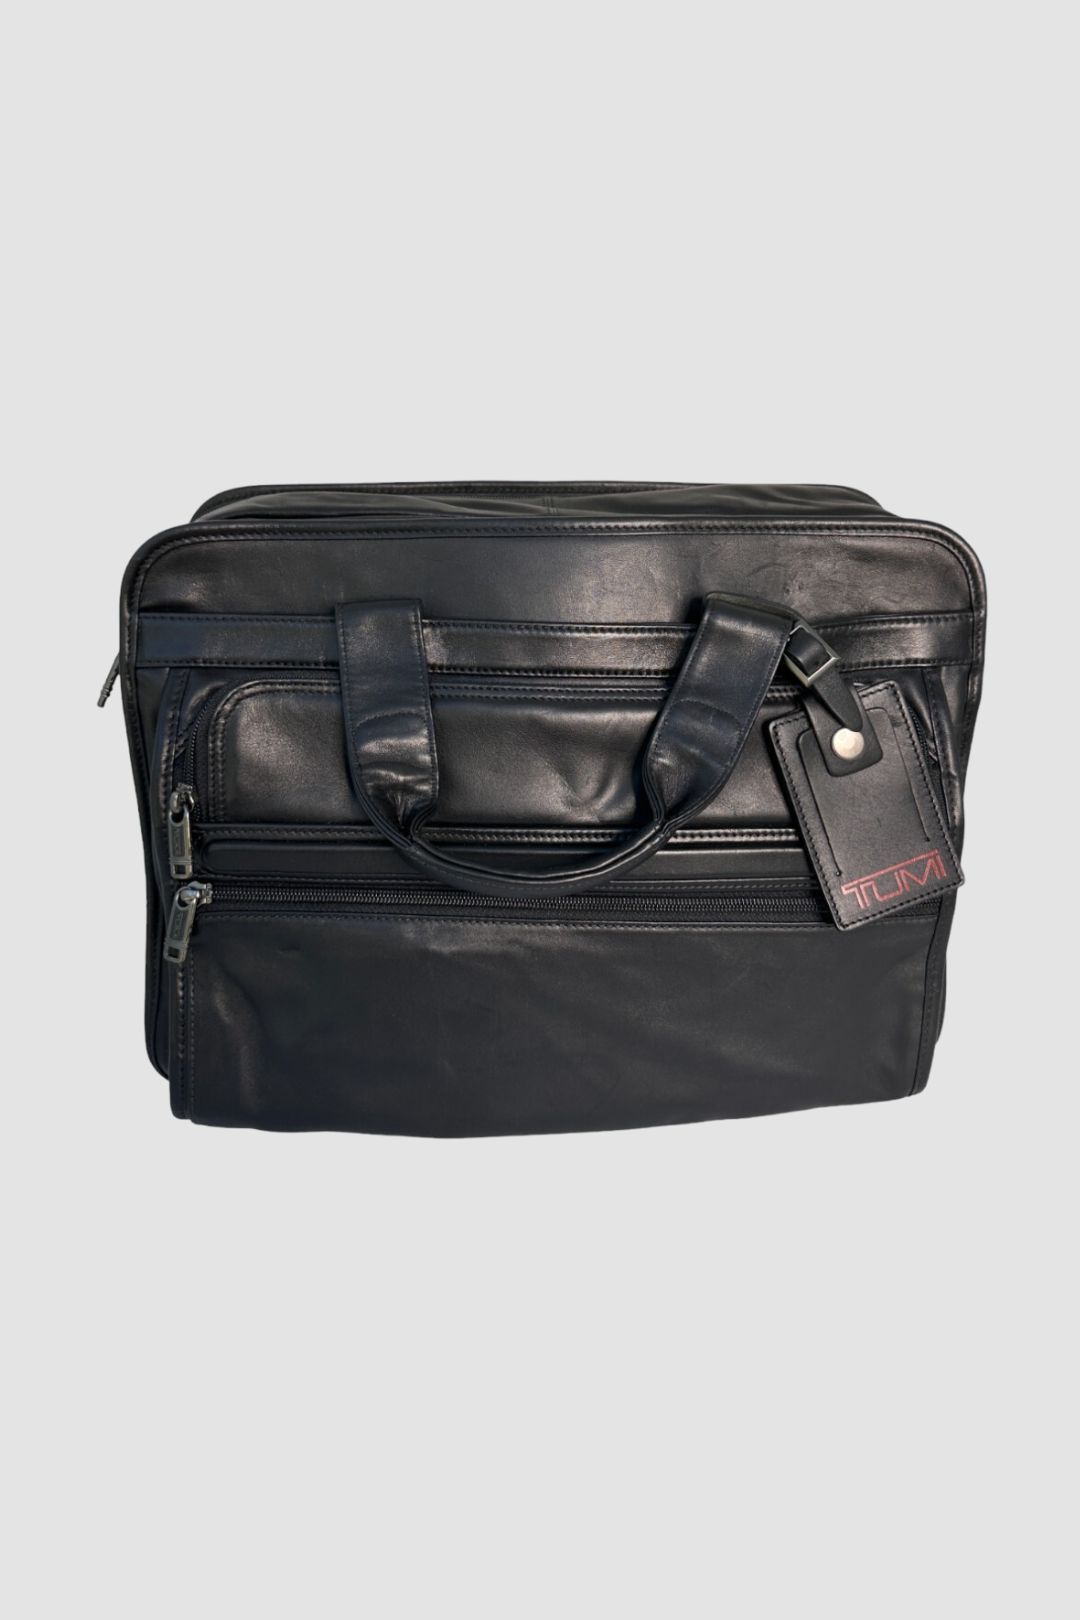 Tumi Full Leather Briefcase/Travel Bag in Black